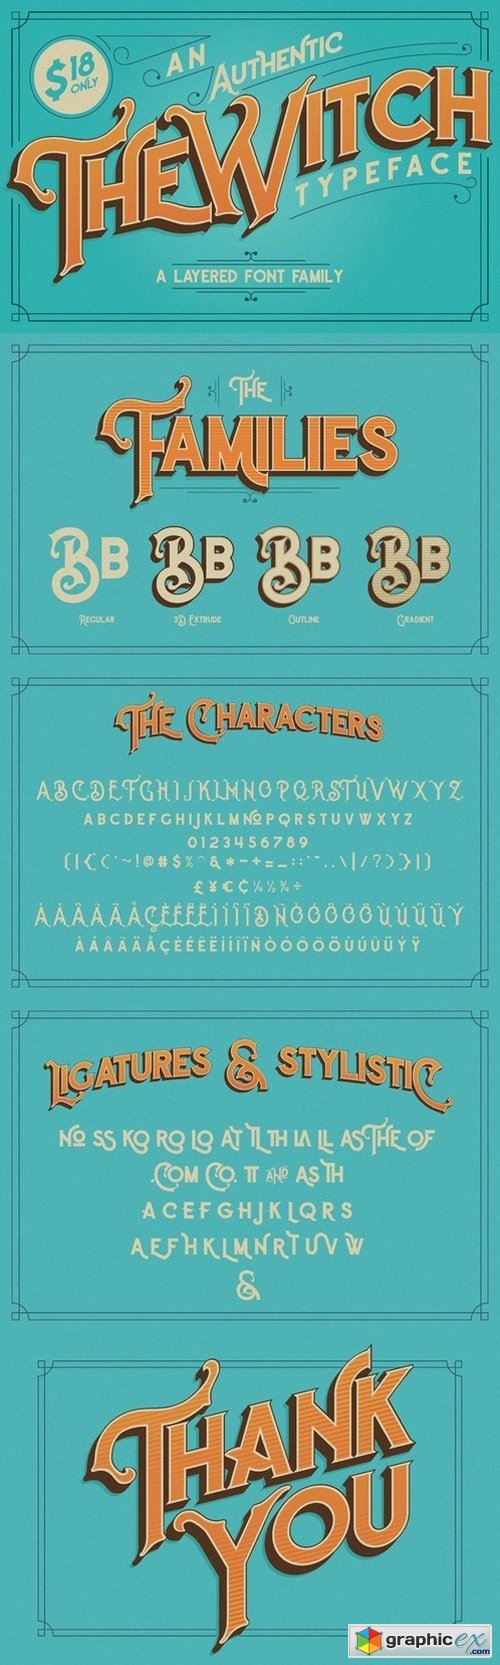 The Witch Typeface